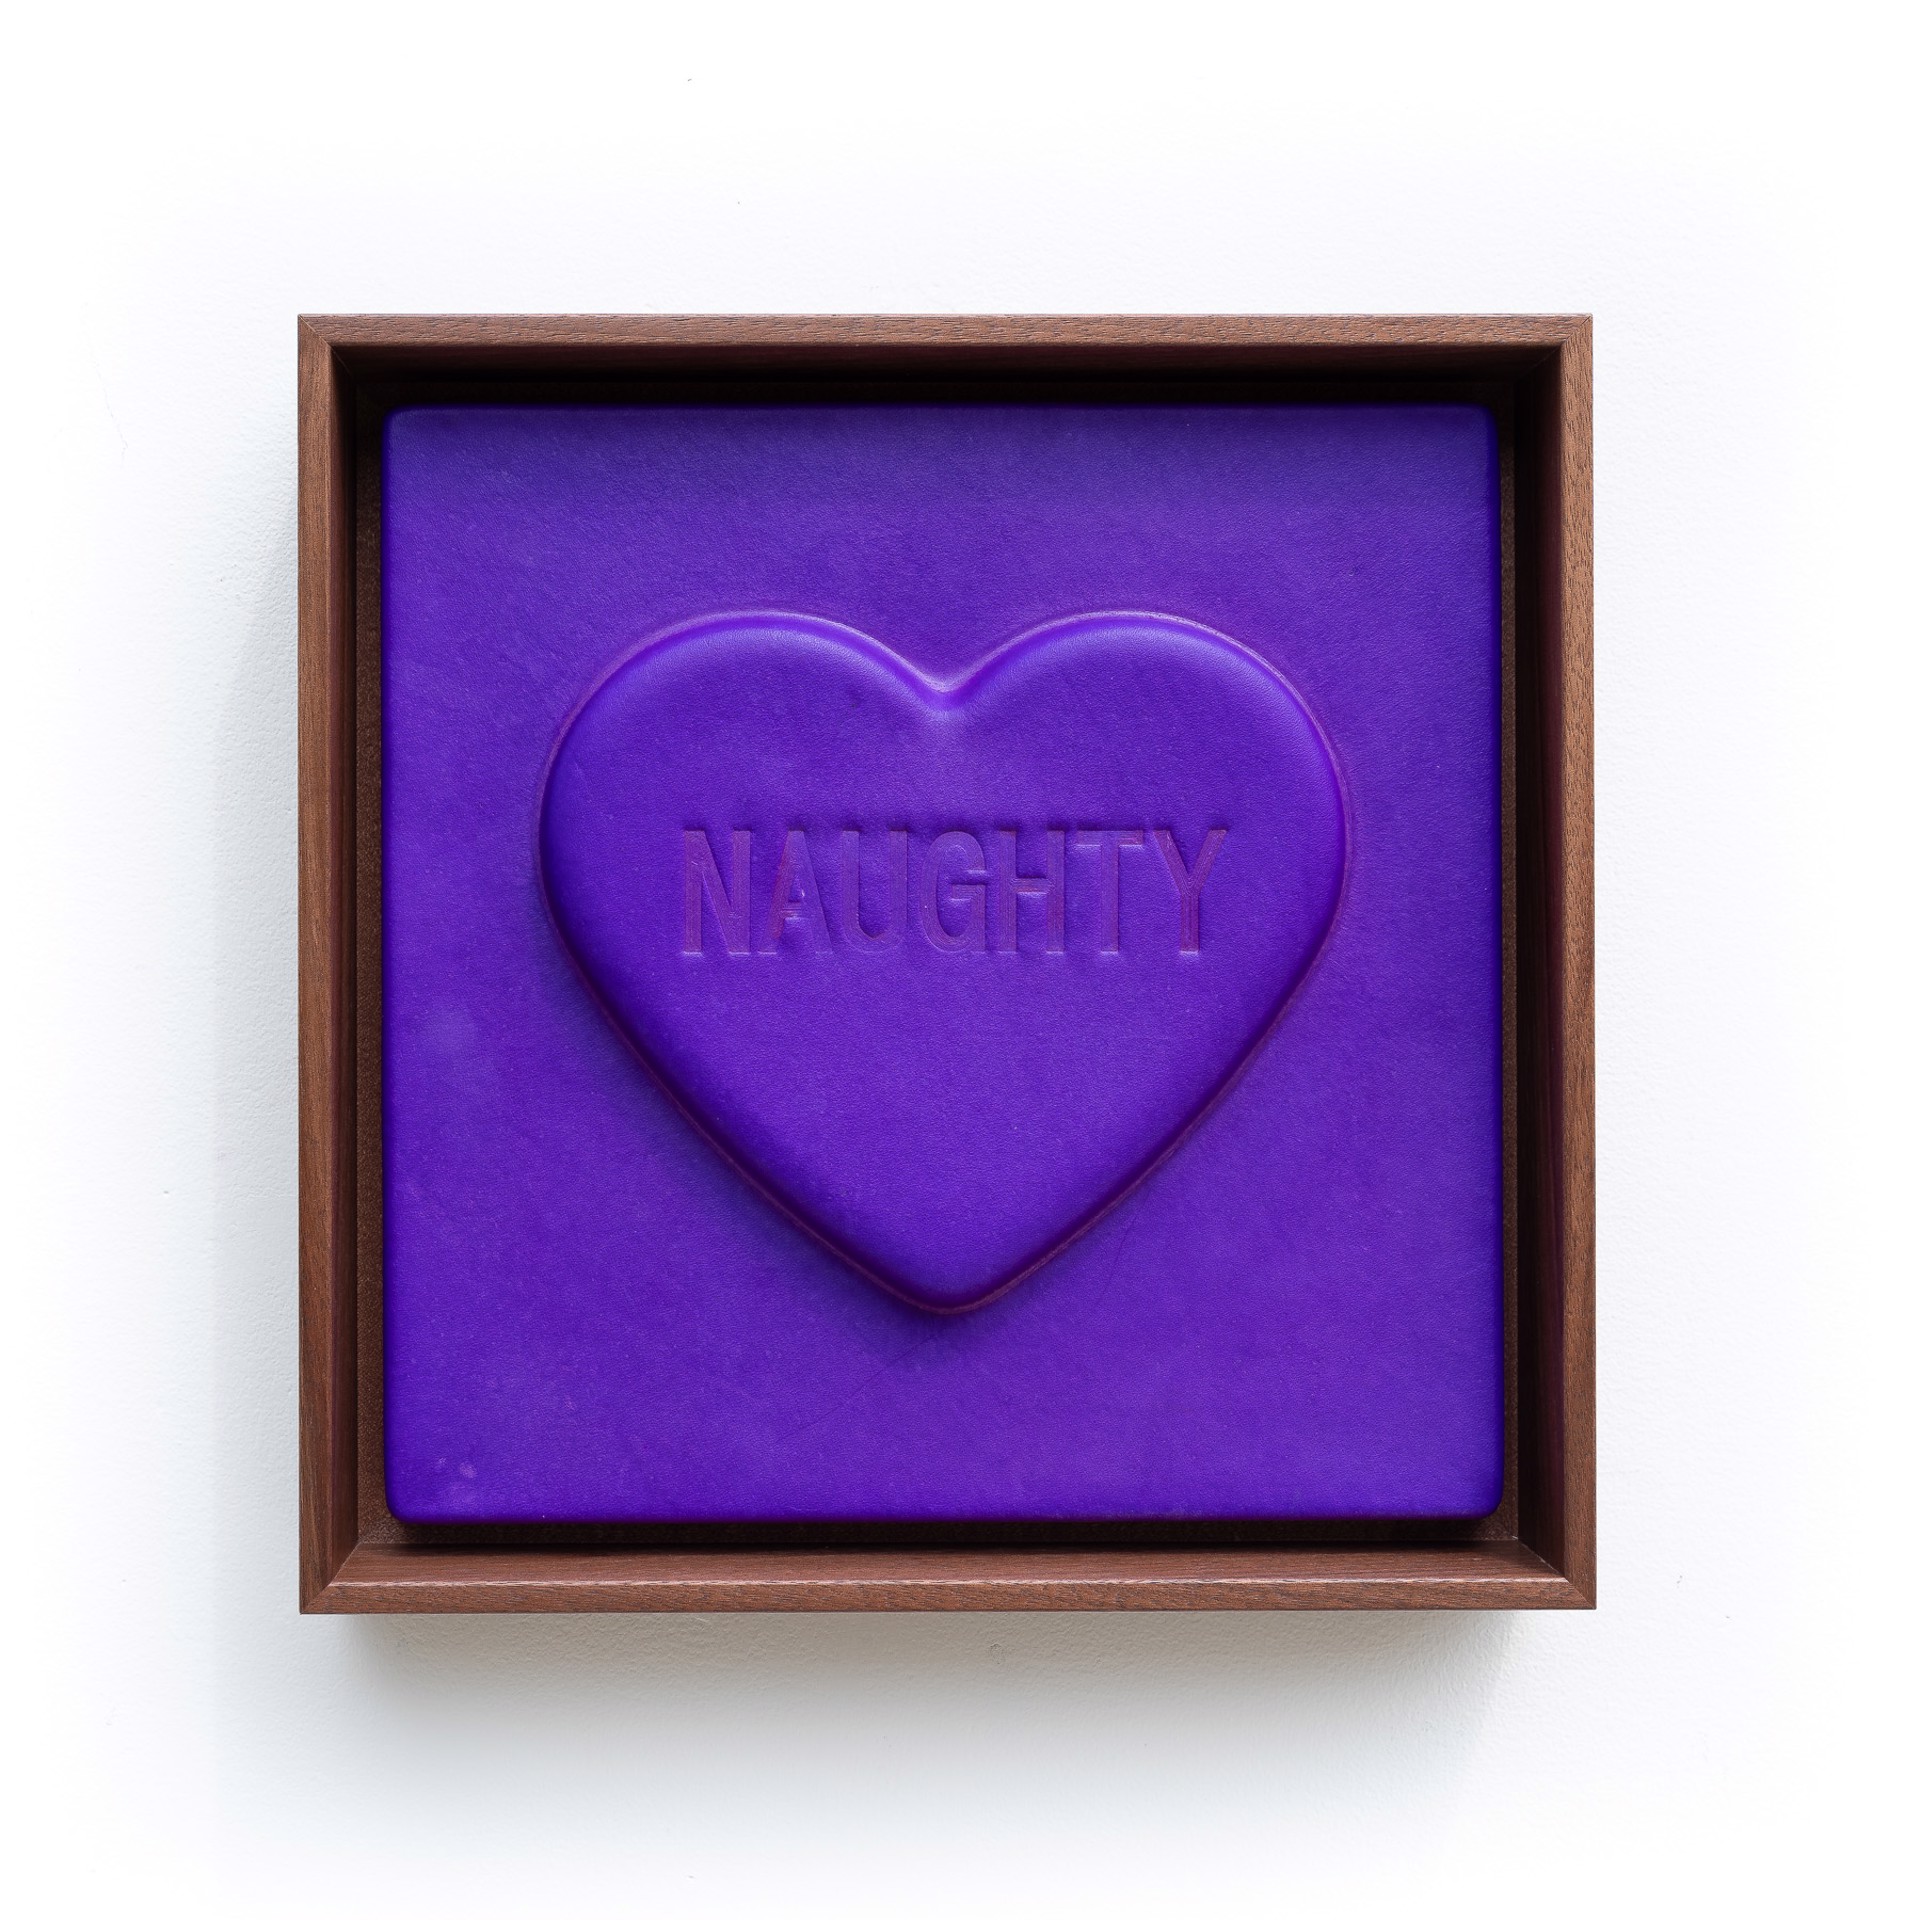 'NAUGHTY' - Sweetheart series by Mx. Hyde